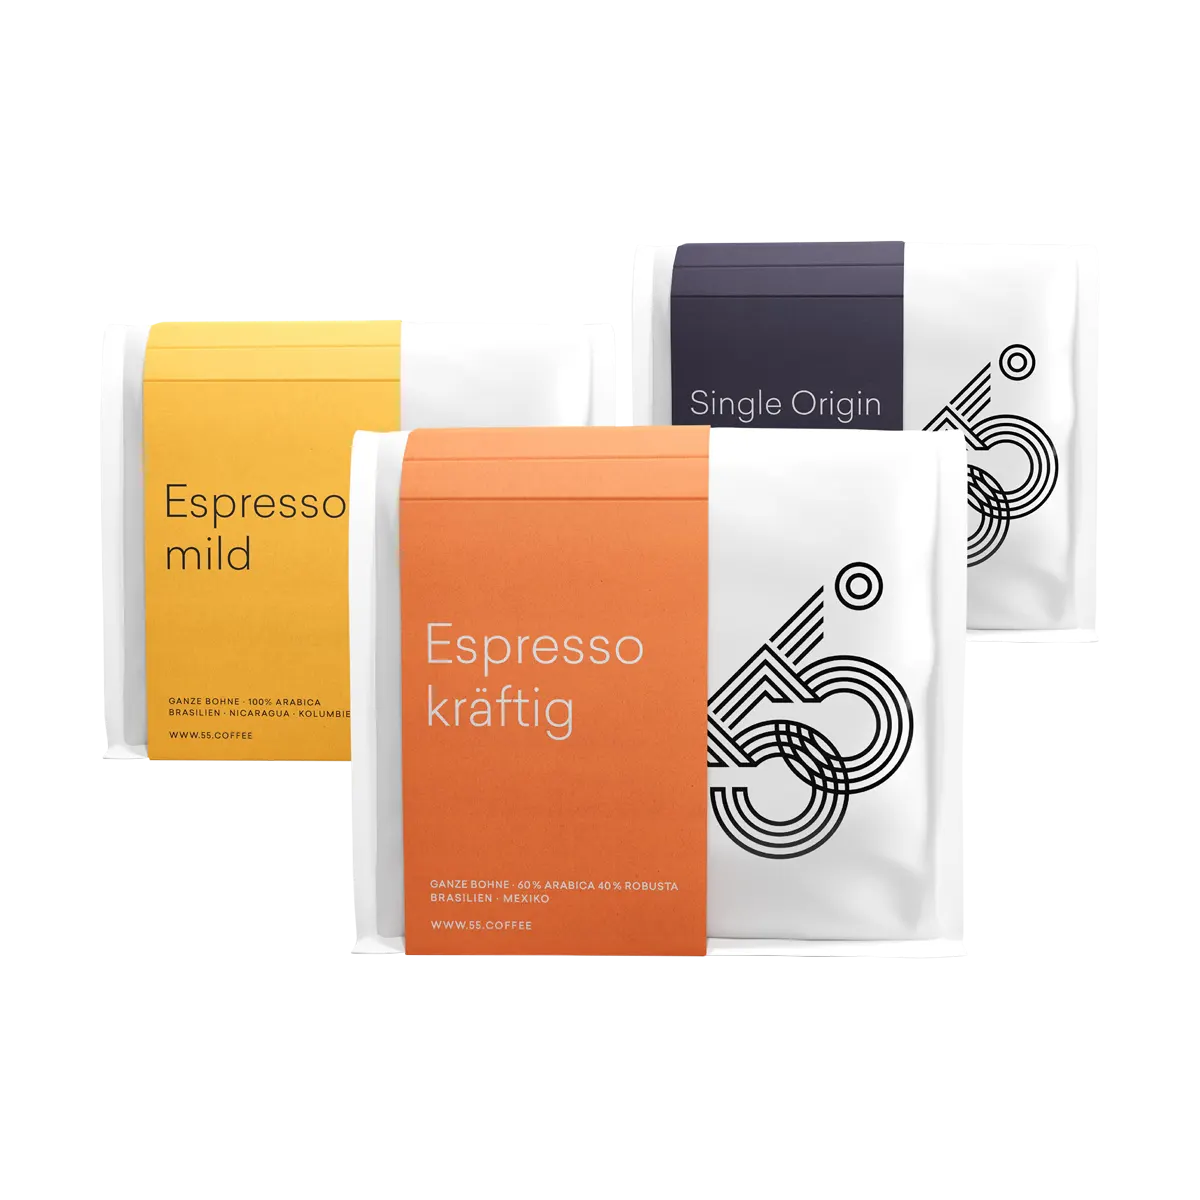 55 degrees espresso tasting set with Gift Wrap